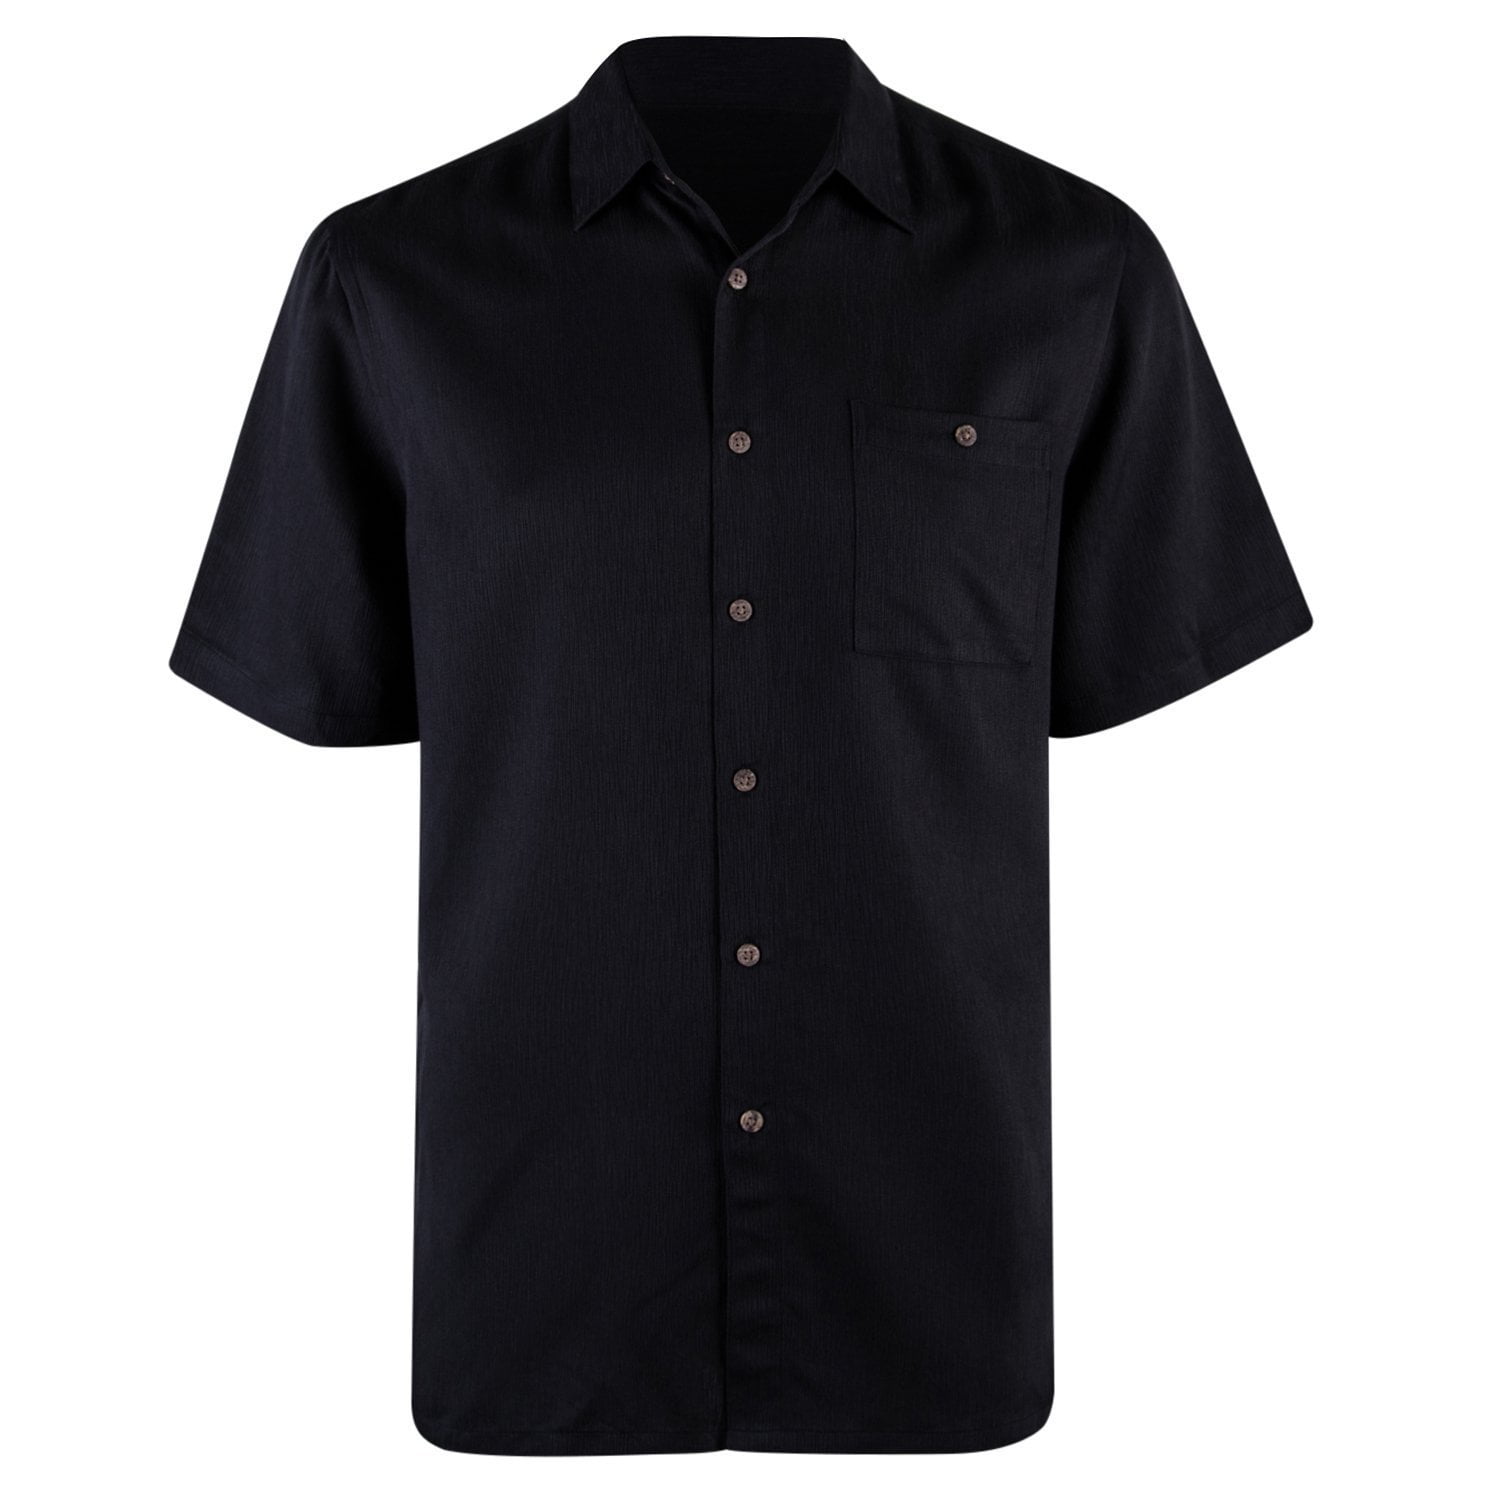 Campia Mens Textured Solid Crepe Weave Shirt (Black, M) Short Sleeve ...